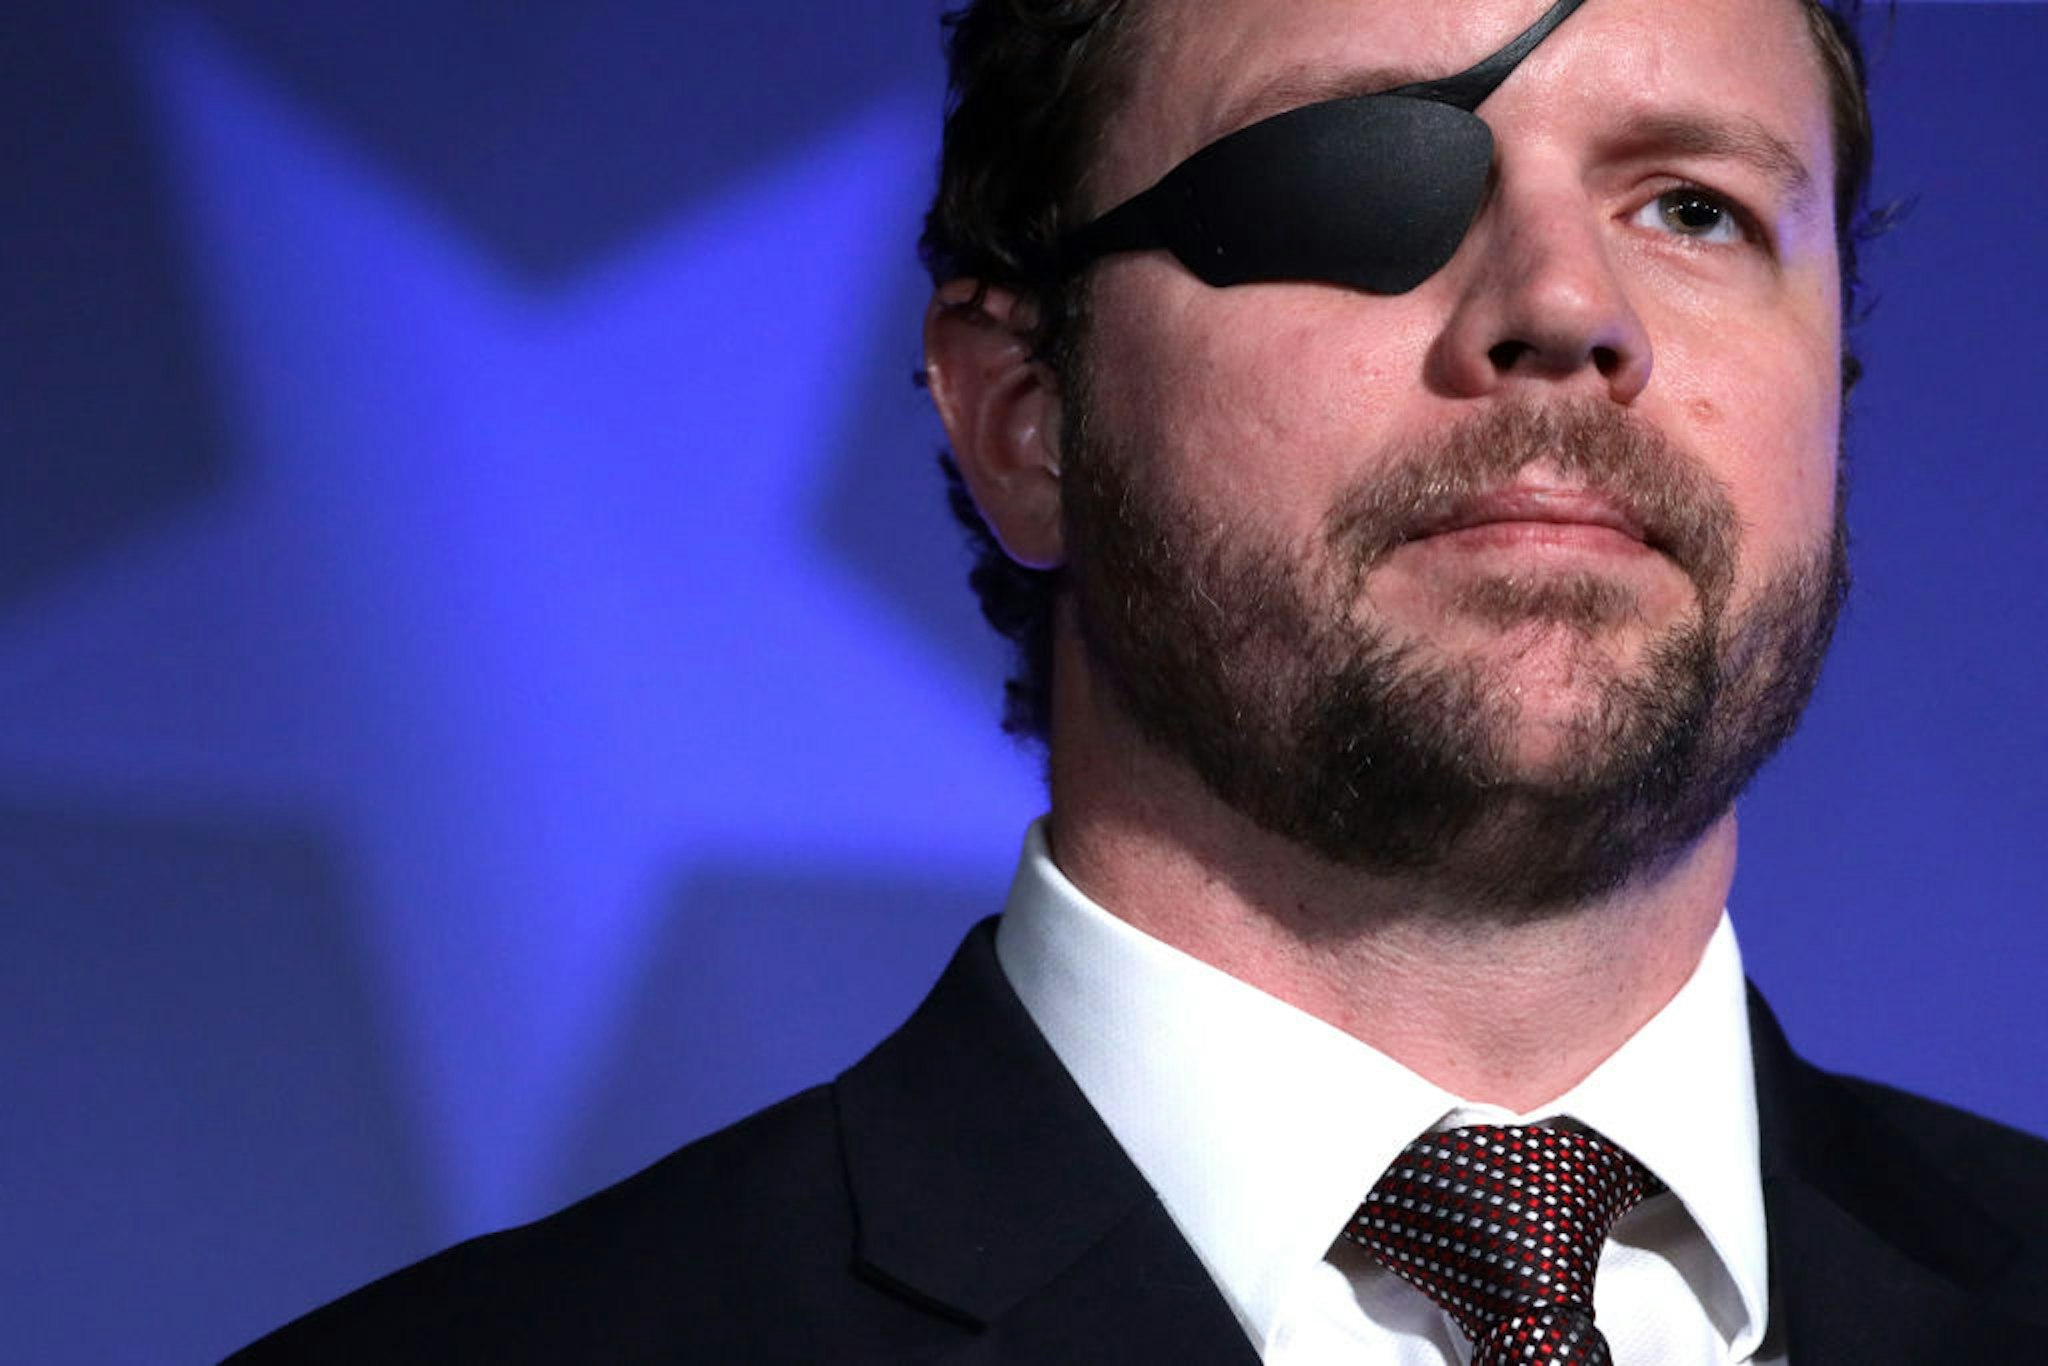 NATIONAL HARBOR, MARYLAND - FEBRUARY 26: U.S. Rep. Dan Crenshaw (R-TX) speaks on “The Fate of Our Culture and Our Nation Hangs in the Balance” during the CPAC Direct Action Training at the annual Conservative Political Action Conference at Gaylord National Resort &amp; Convention Center February 26, 2020 in National Harbor, Maryland. U.S. President Donald Trump is expected to address the annual event on February 29th. (Photo by Alex Wong/Getty Images)